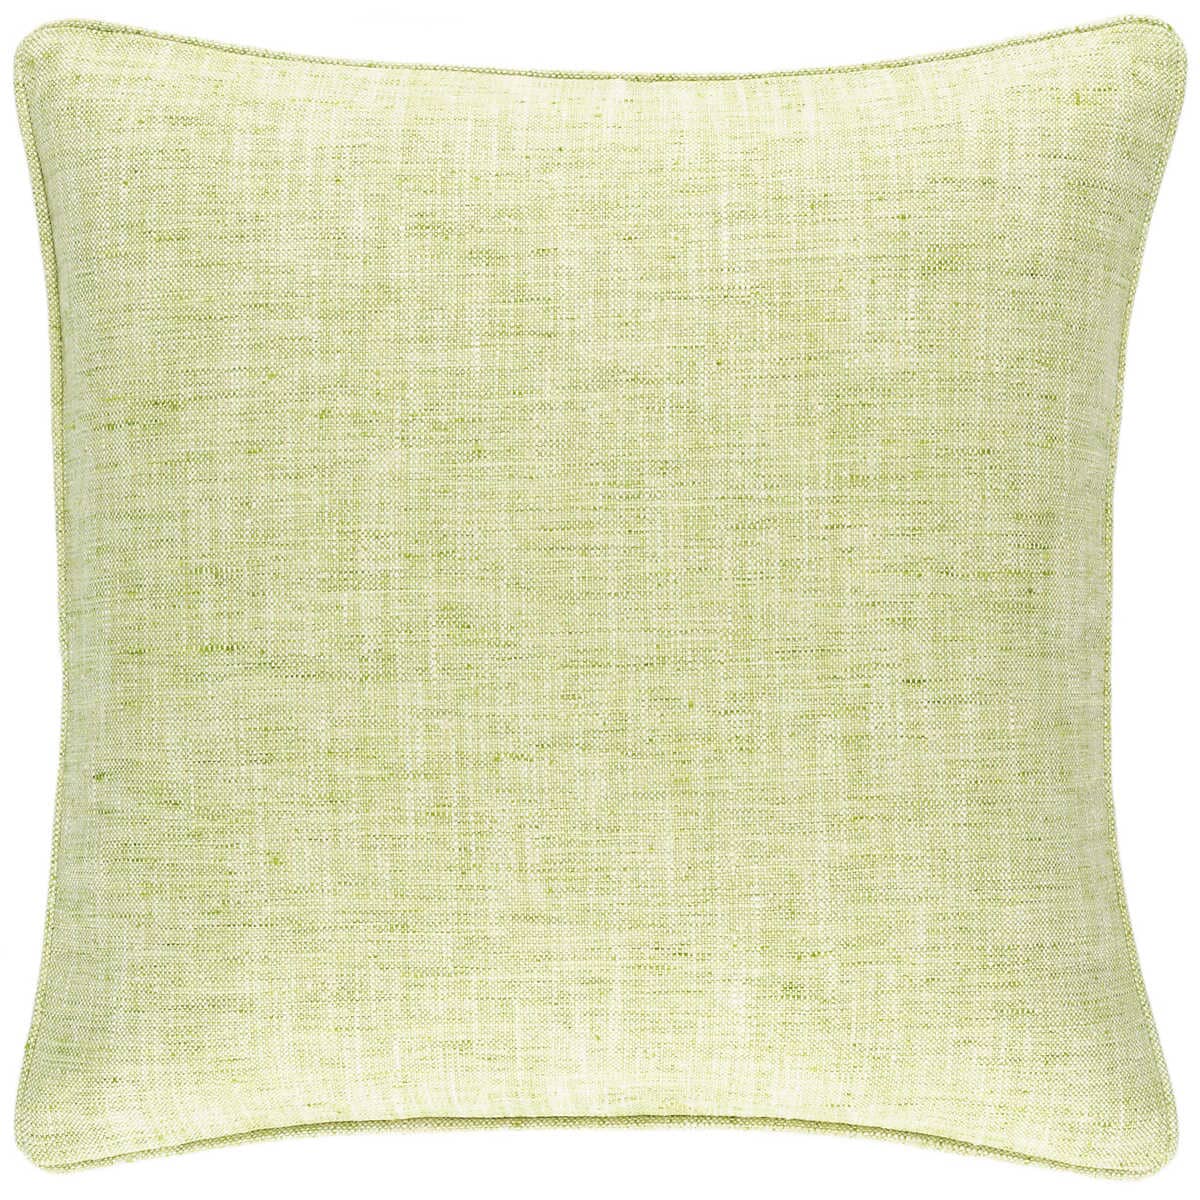 Greylock Soft Green Indoor/Outdoor Pillow with Insert Pillows 